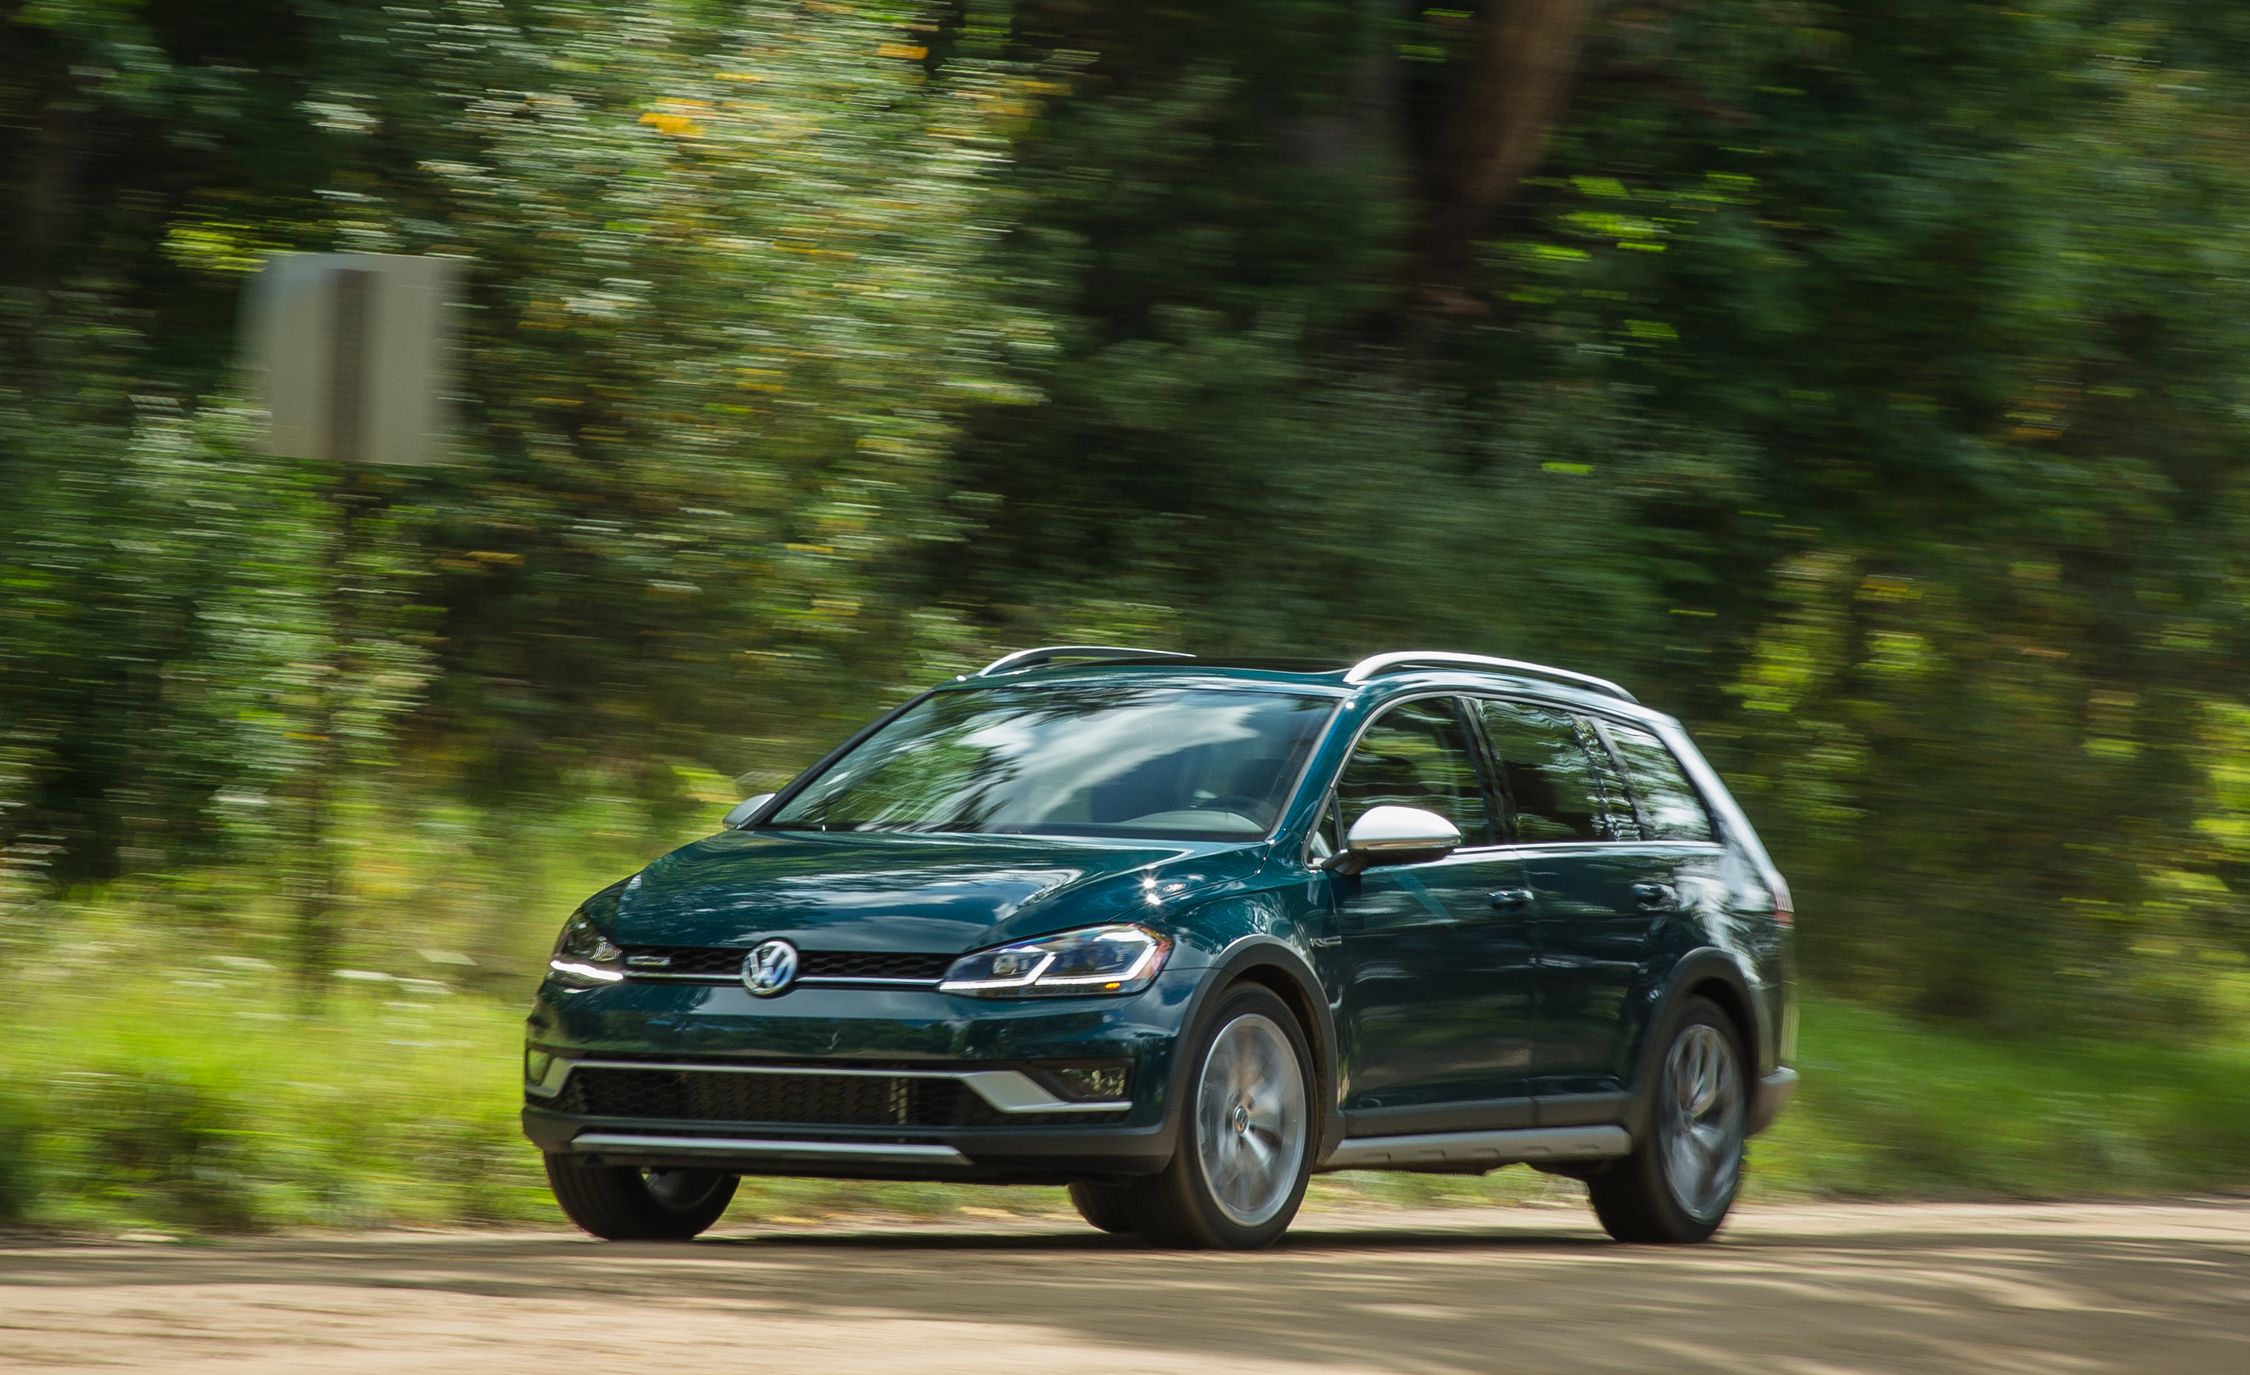 2018-volkswagen-golf-alltrack-safety-and-driver-assistance-review-car-and-driver-photo-696974-s-original.jpg